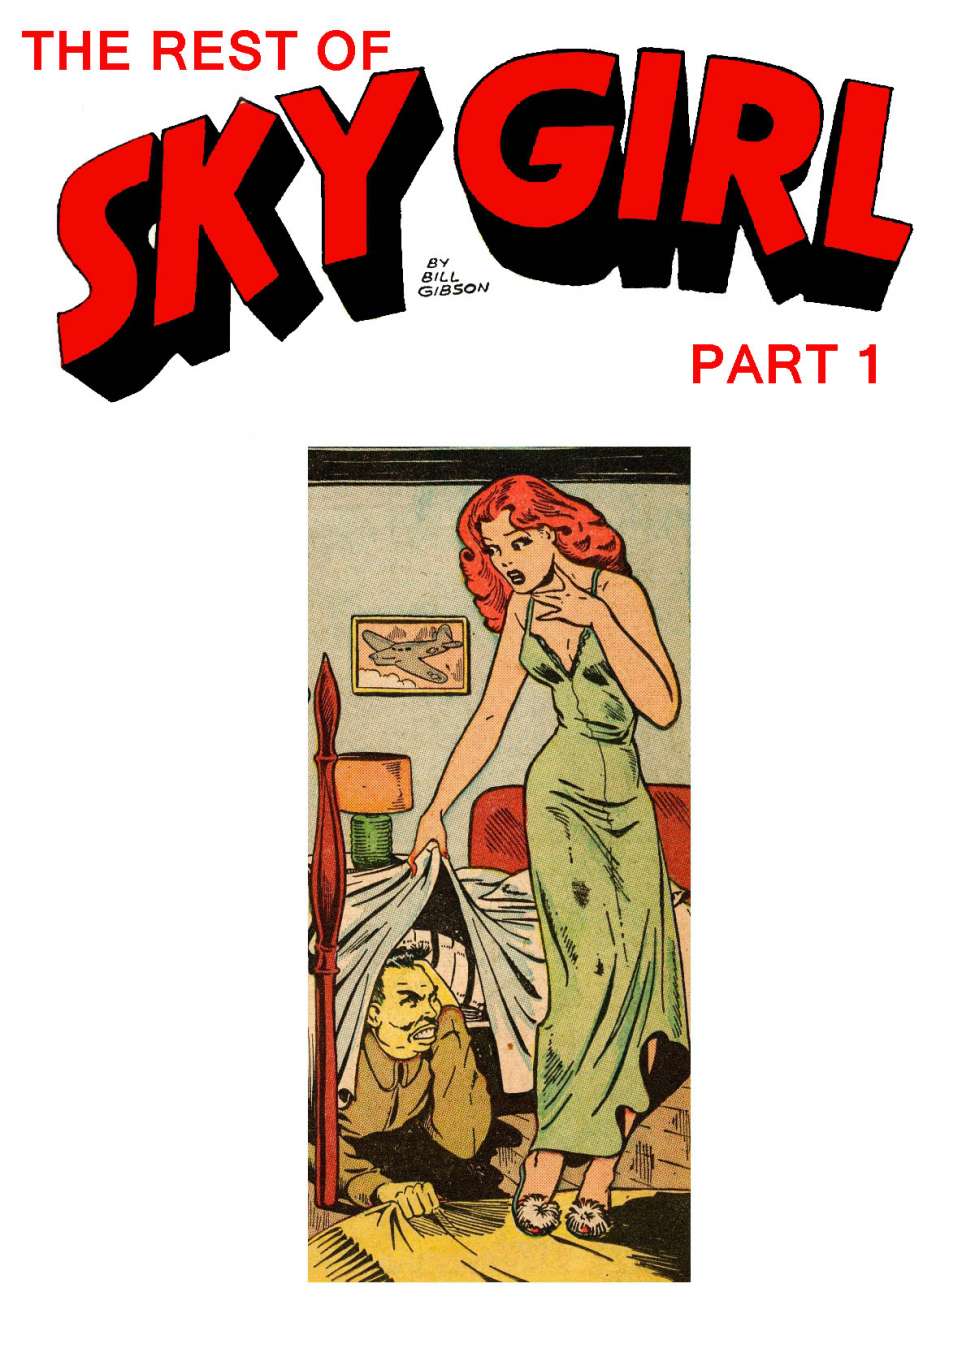 Book Cover For Sky Girl Collection, The Rest of Part 1